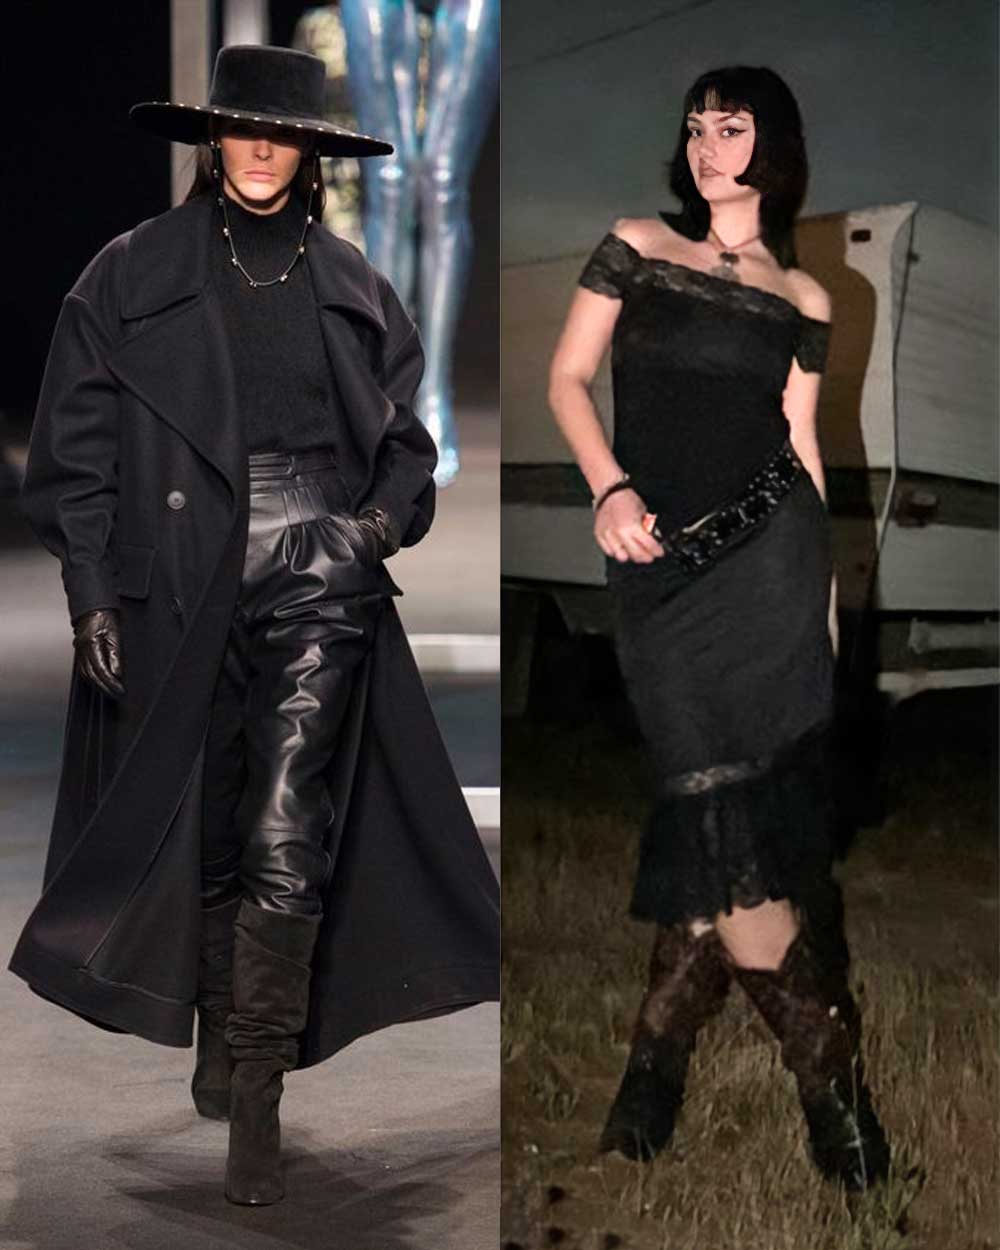 Southern Goth style